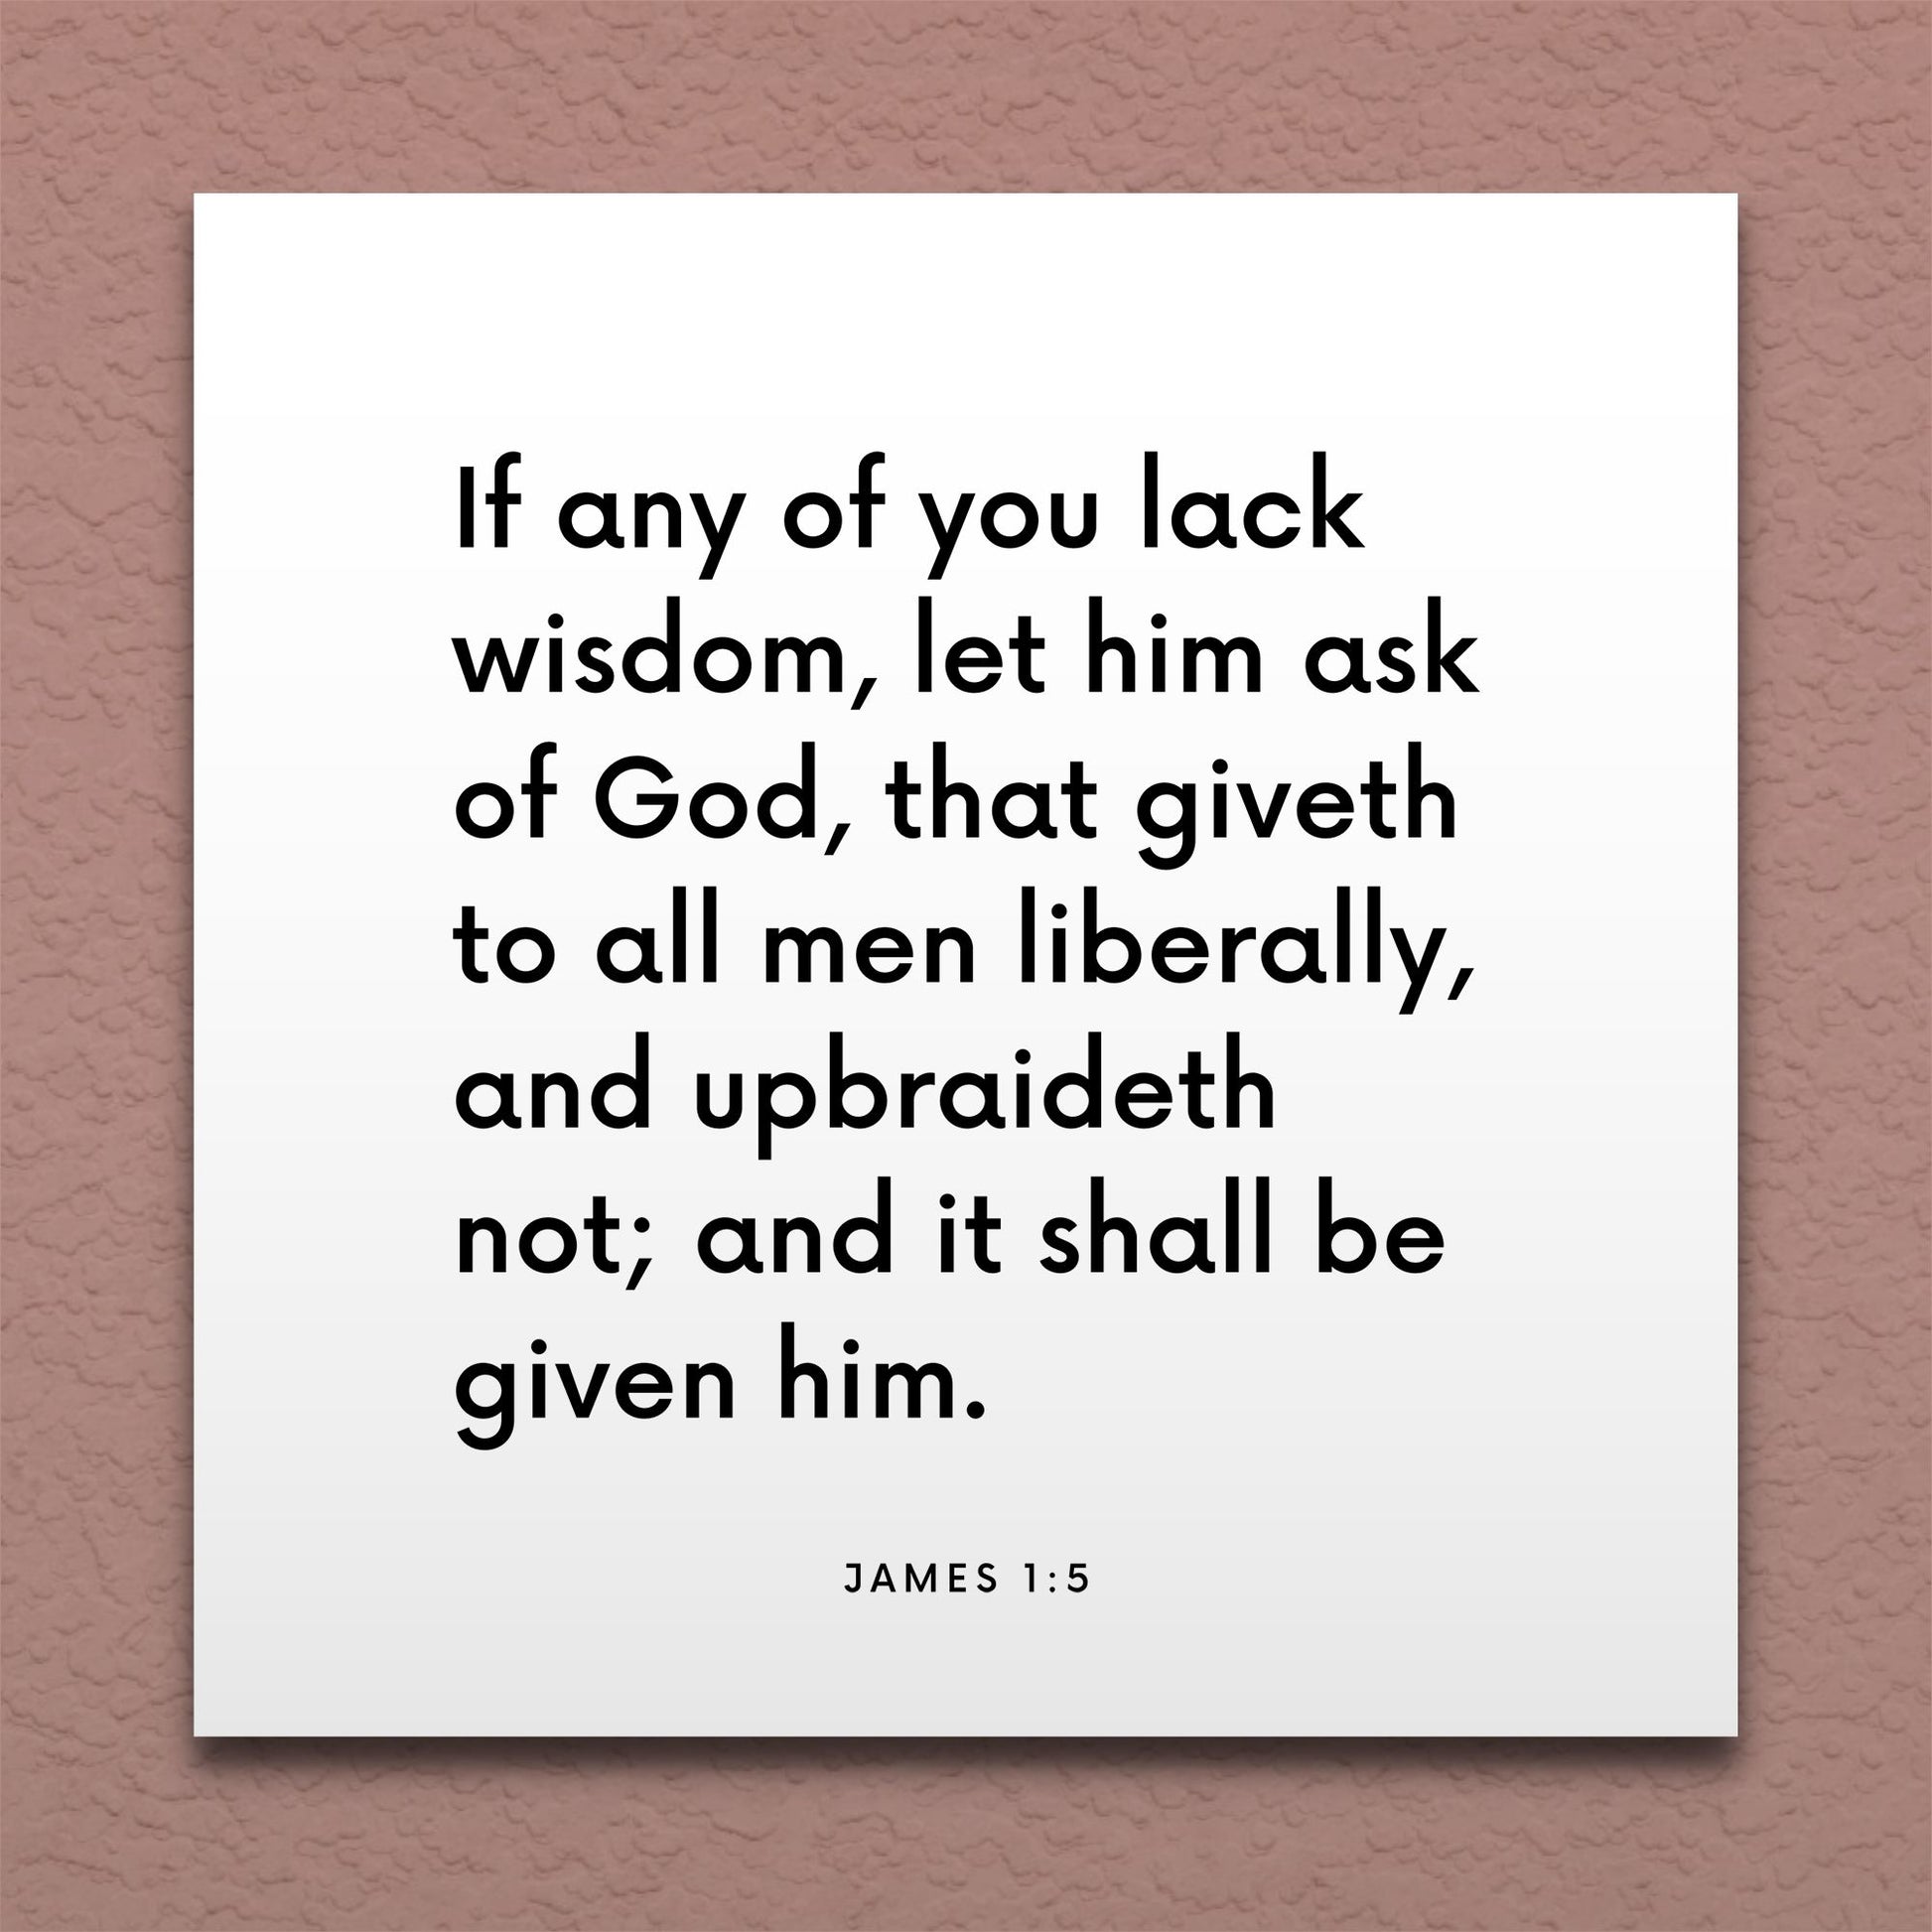 Wall-mounted scripture tile for James 1:5 - "If any of you lack wisdom, let him ask of God"